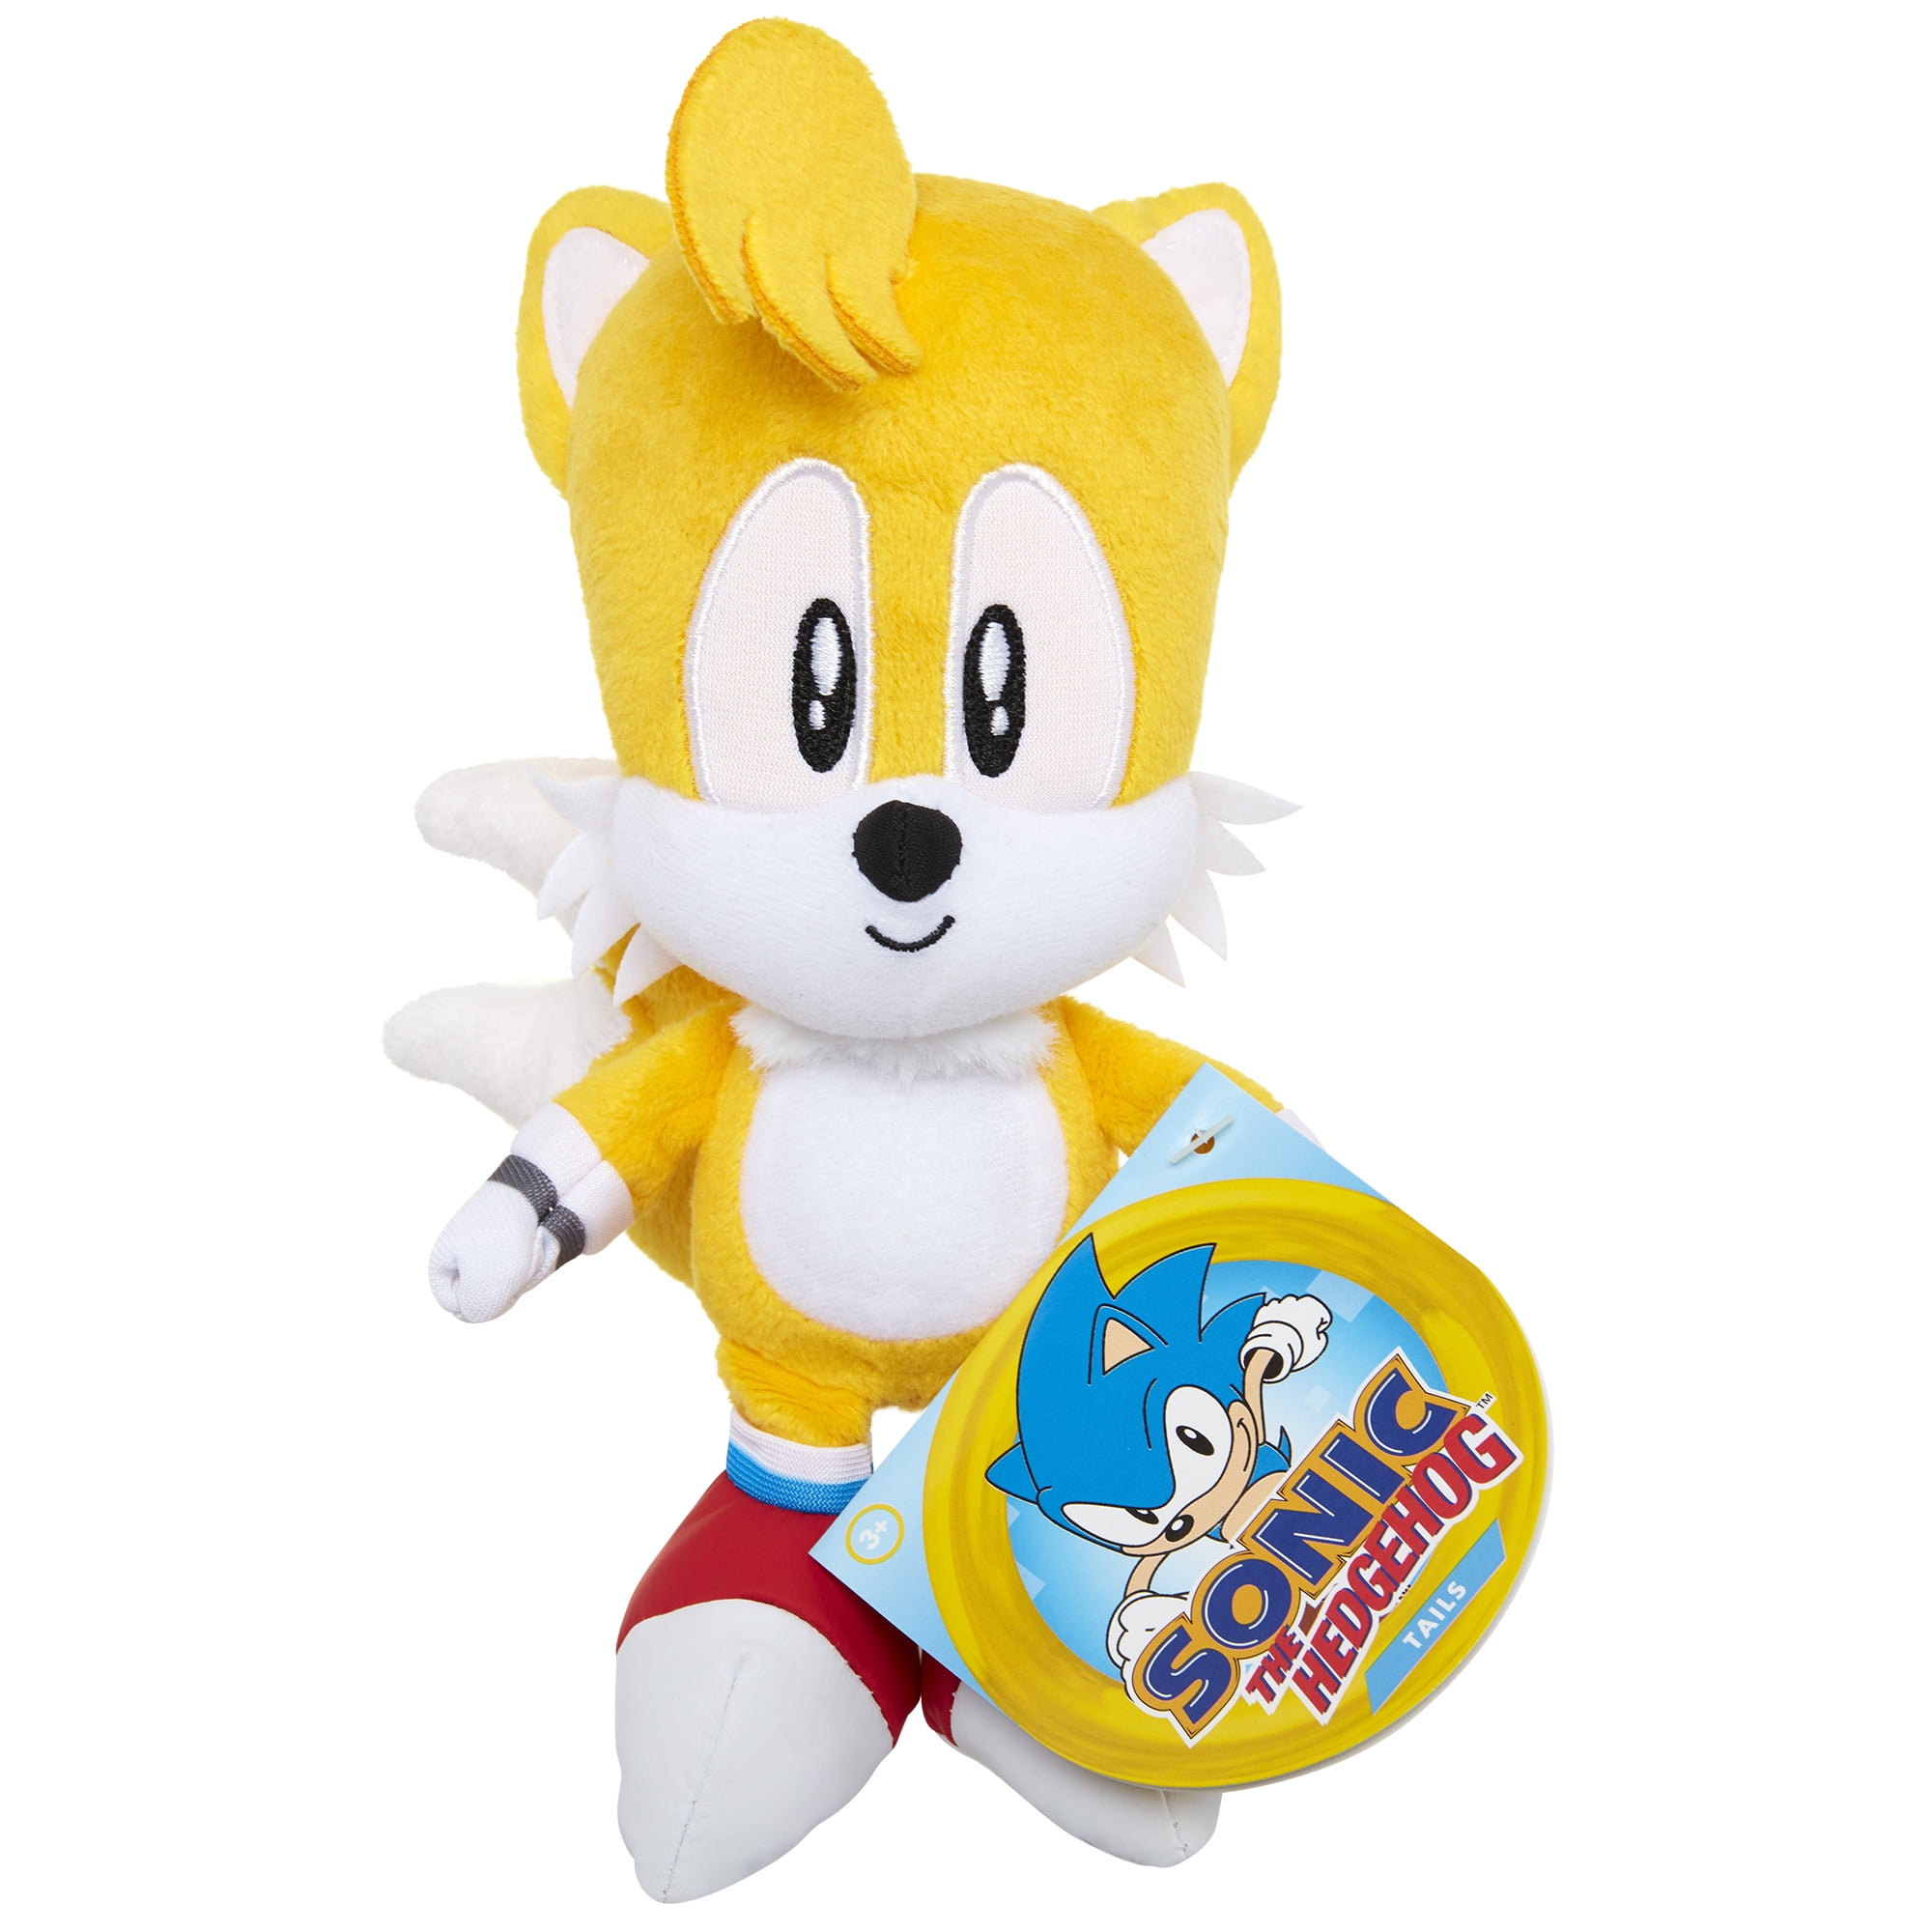 Details about   SONIC PLUSH-CLASSIC SONIC THE HEDGEHOG 9" PLUSH-NEW AUTHENTIC Doll Toys For Kids 